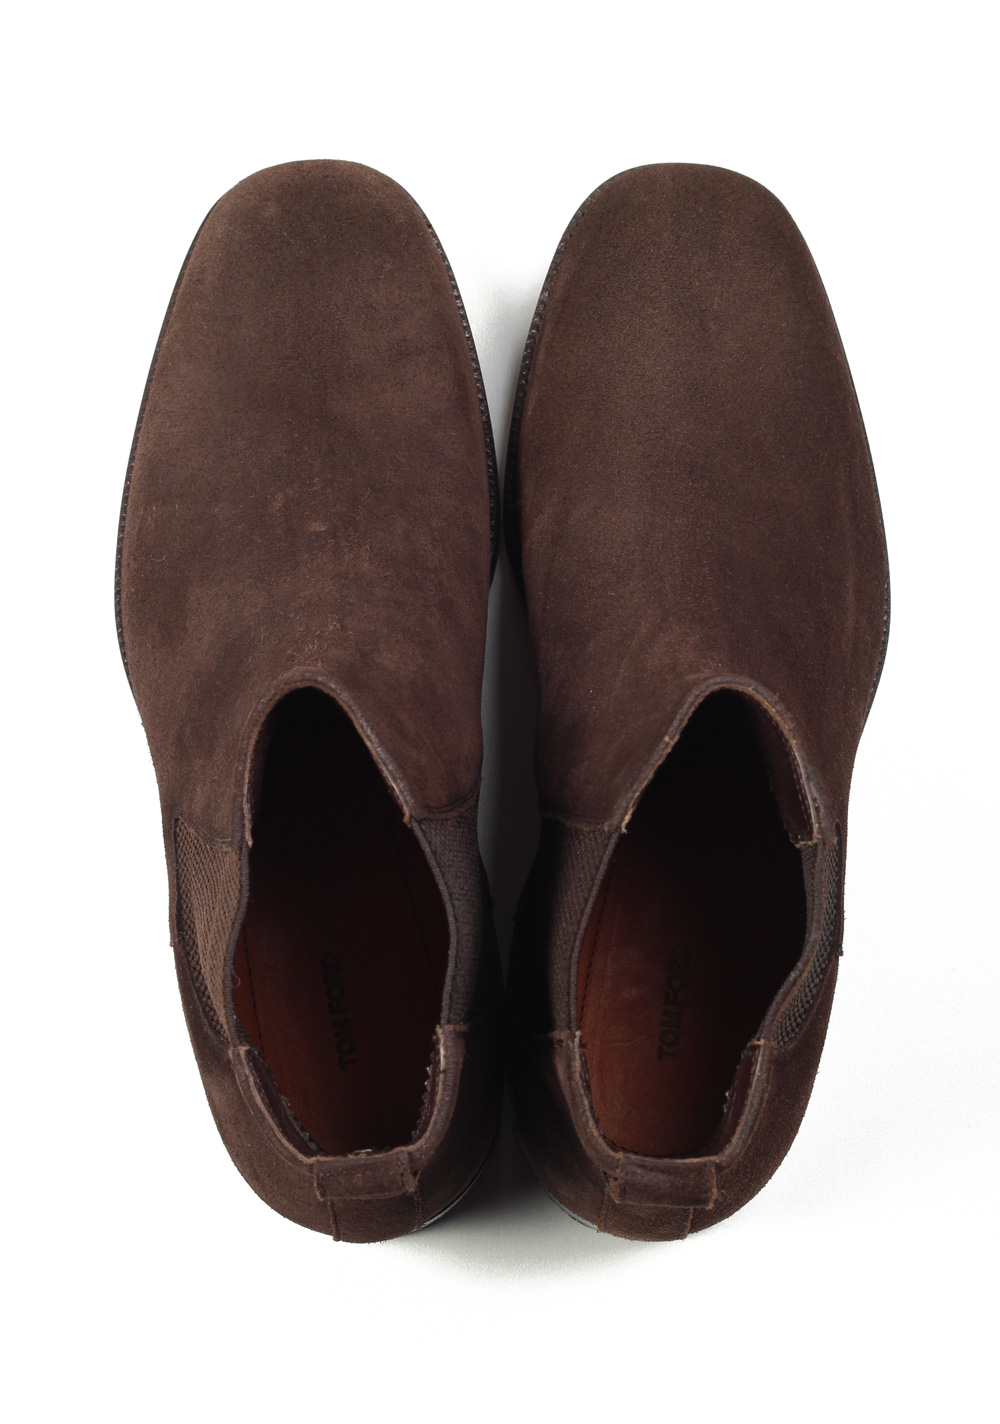 TOM FORD Wilson Brown Suede Chelsea Boots Shoes Size 9 UK / 10 U.S. | Costume Limité